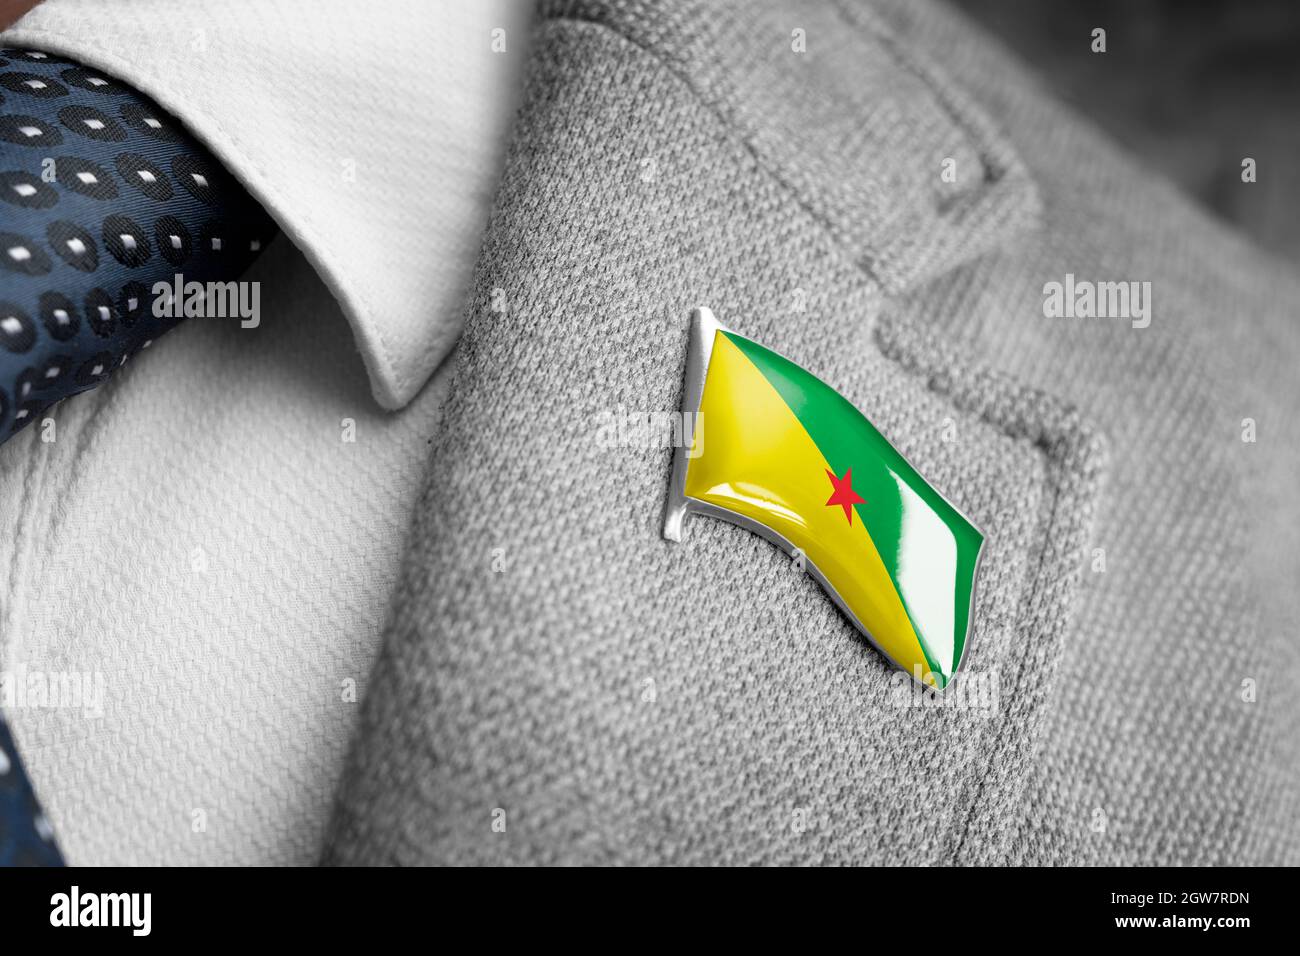 Metal badge with the flag of French Guiana on a suit lapel Stock Photo